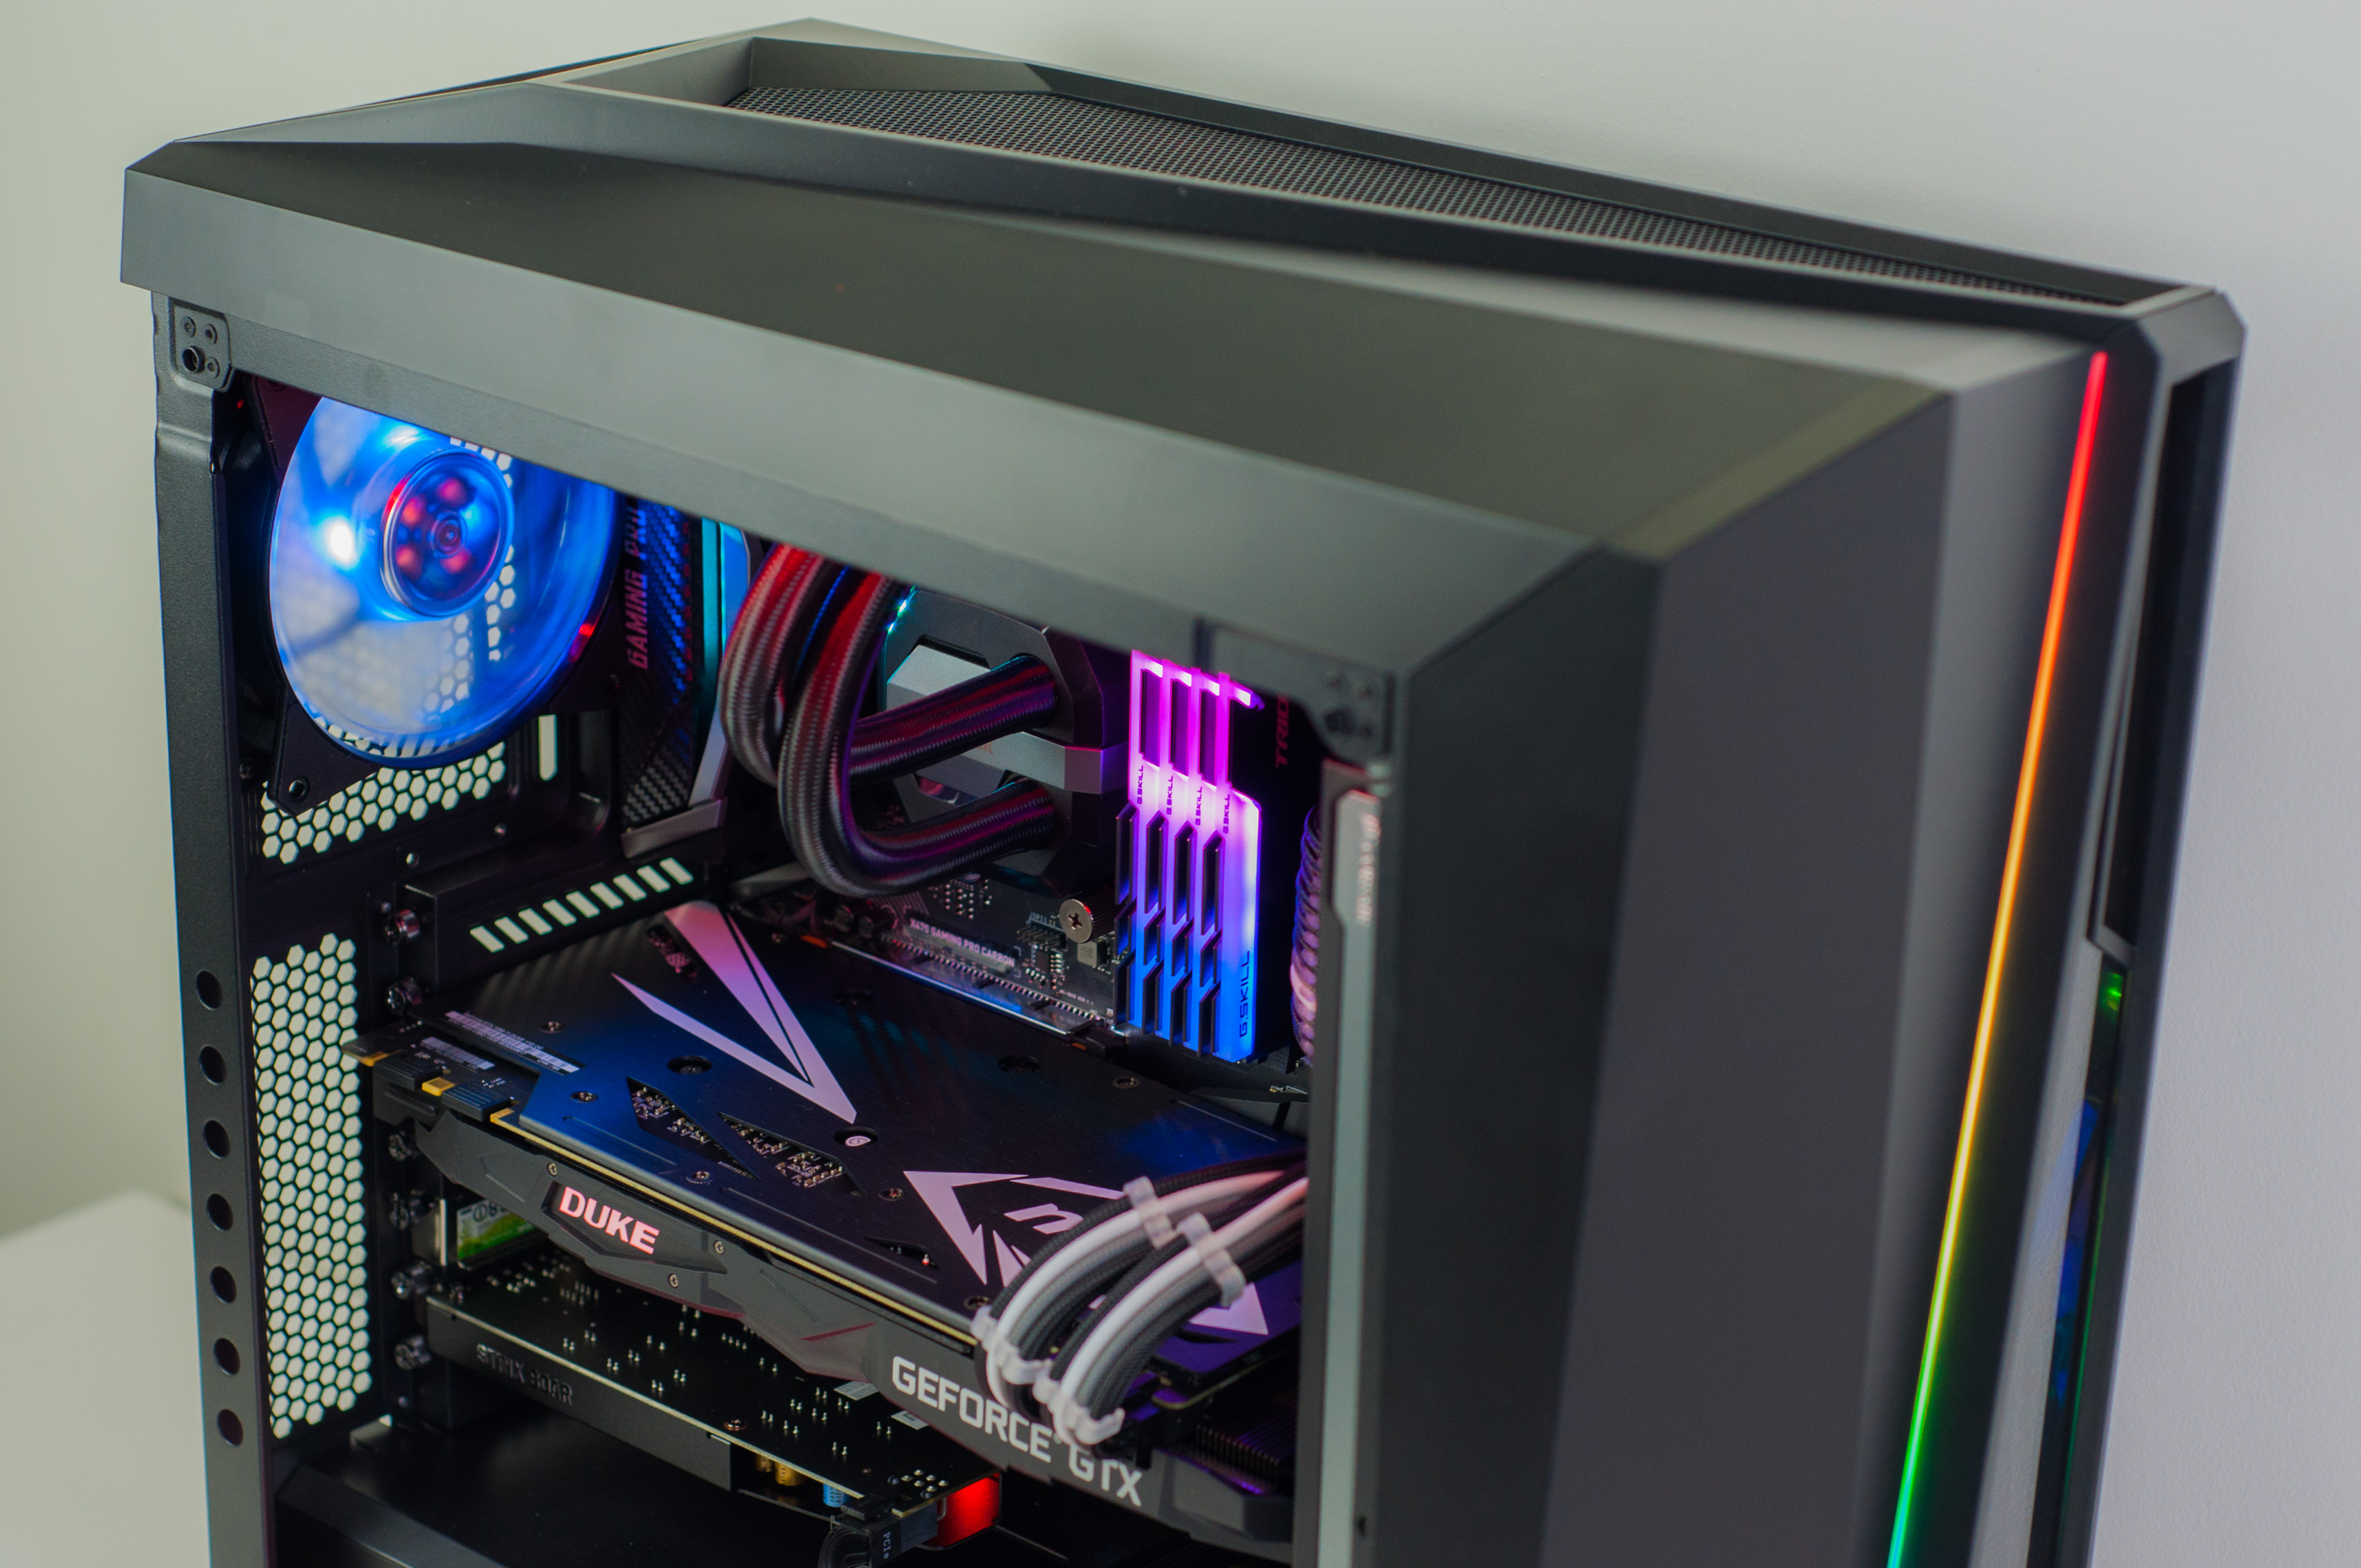 Wraith Gaming PC in Corsair Carbide Spec Omega Tempered Glass RGB Black